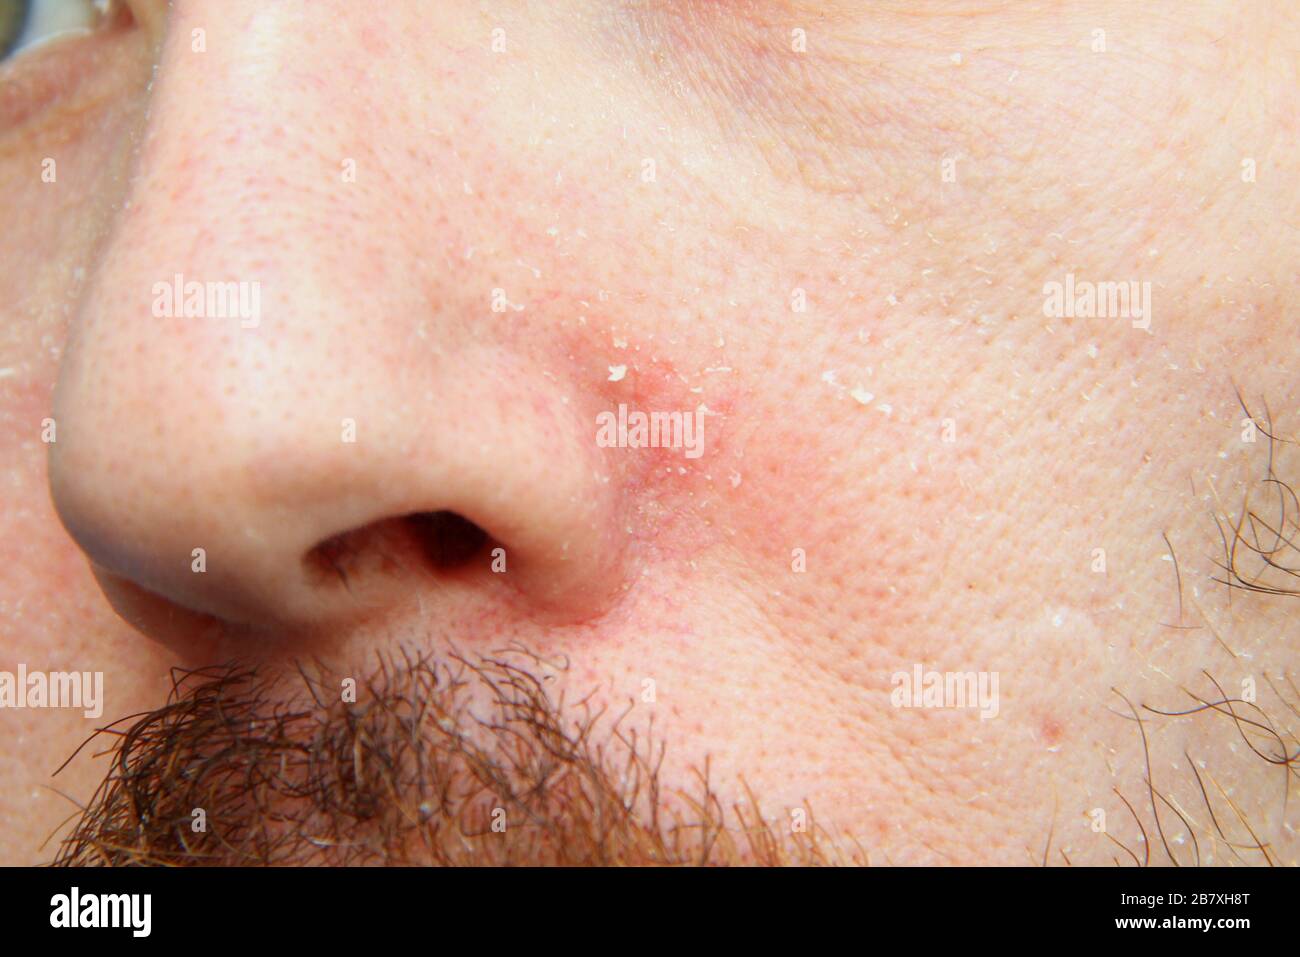 Part of the face with the nose of an adult white man with dry, flaky skin. Skin problems and diseases. Stock Photo